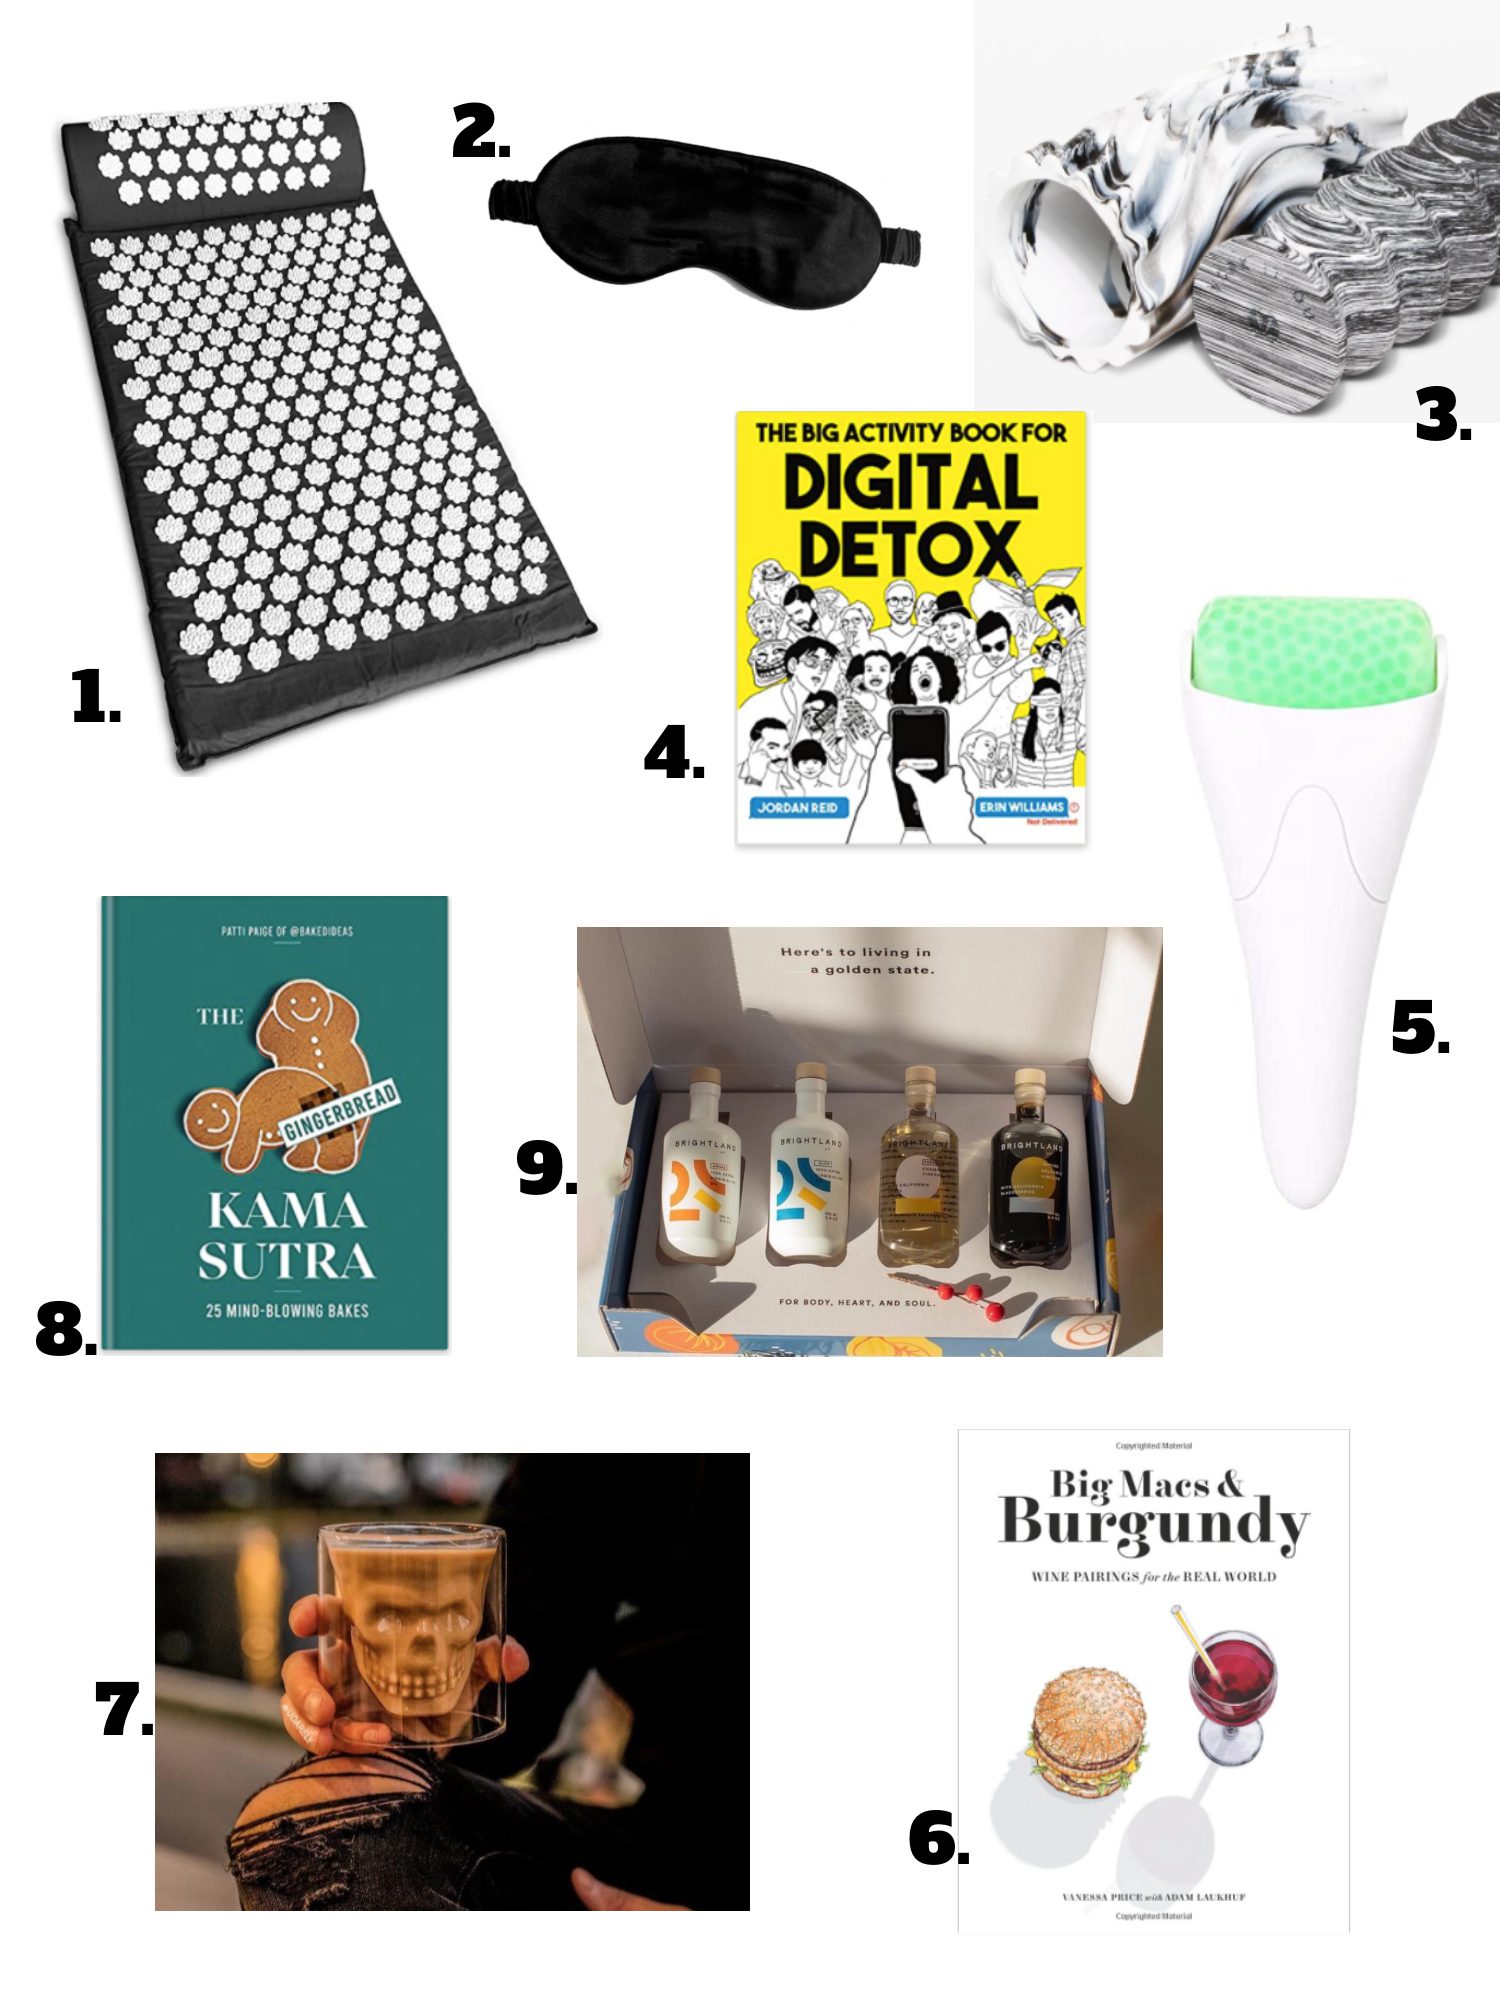 9 Unique Holiday Gift Ideas That Everyone Will Love